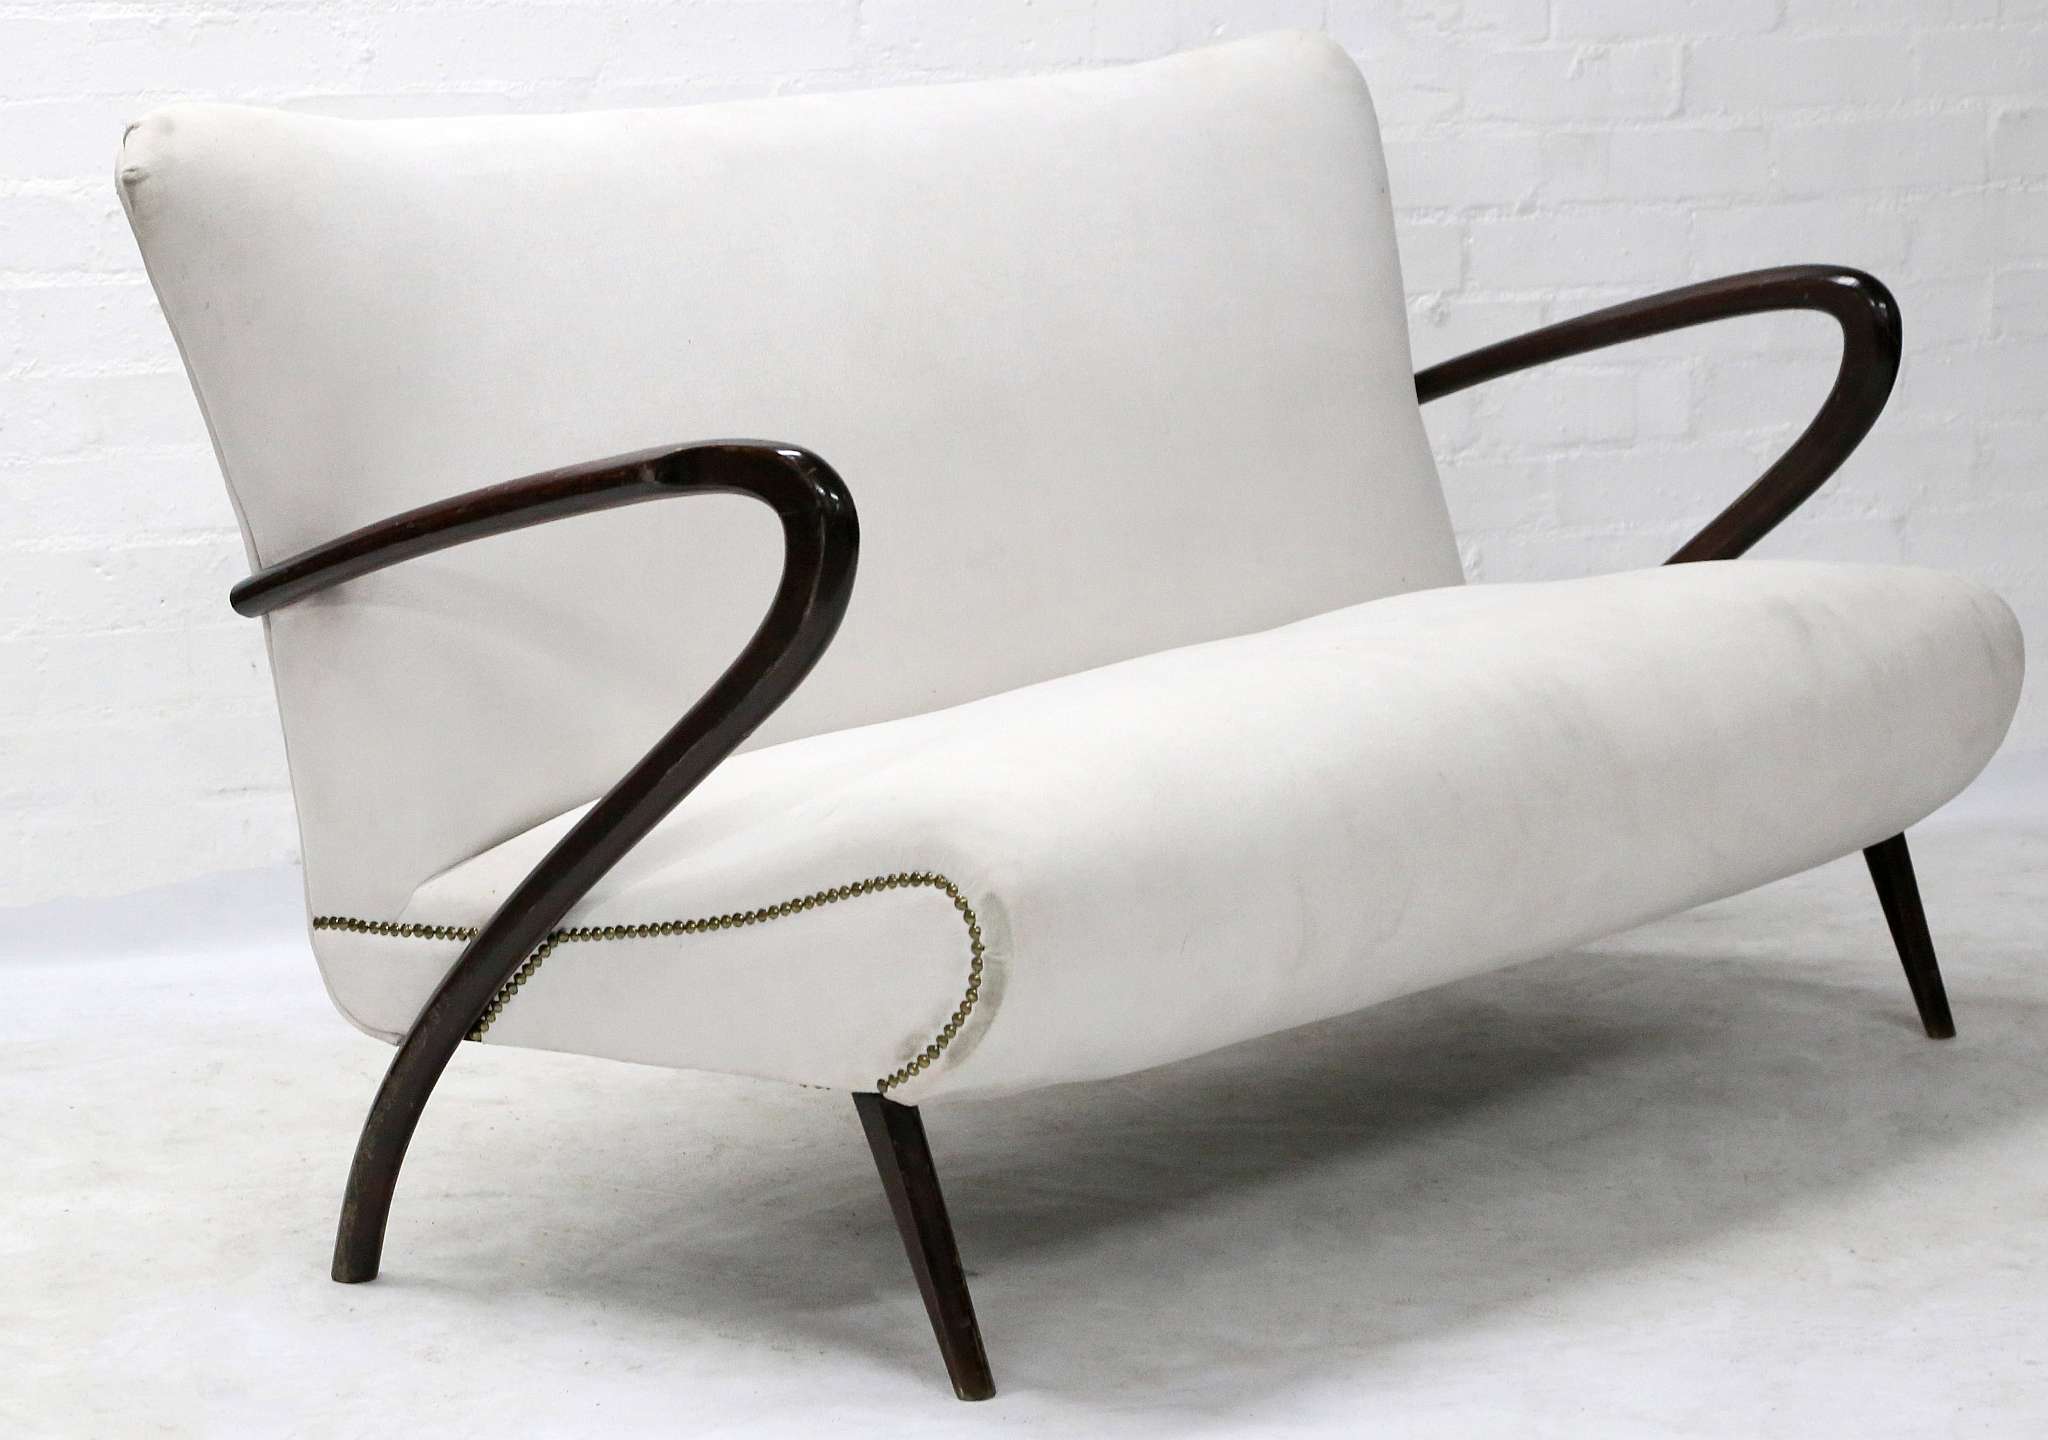 A 1950s ITALIAN TWO SEATER SOFA, designed by Paolo Buffa, with dark stained beech sculptural arms